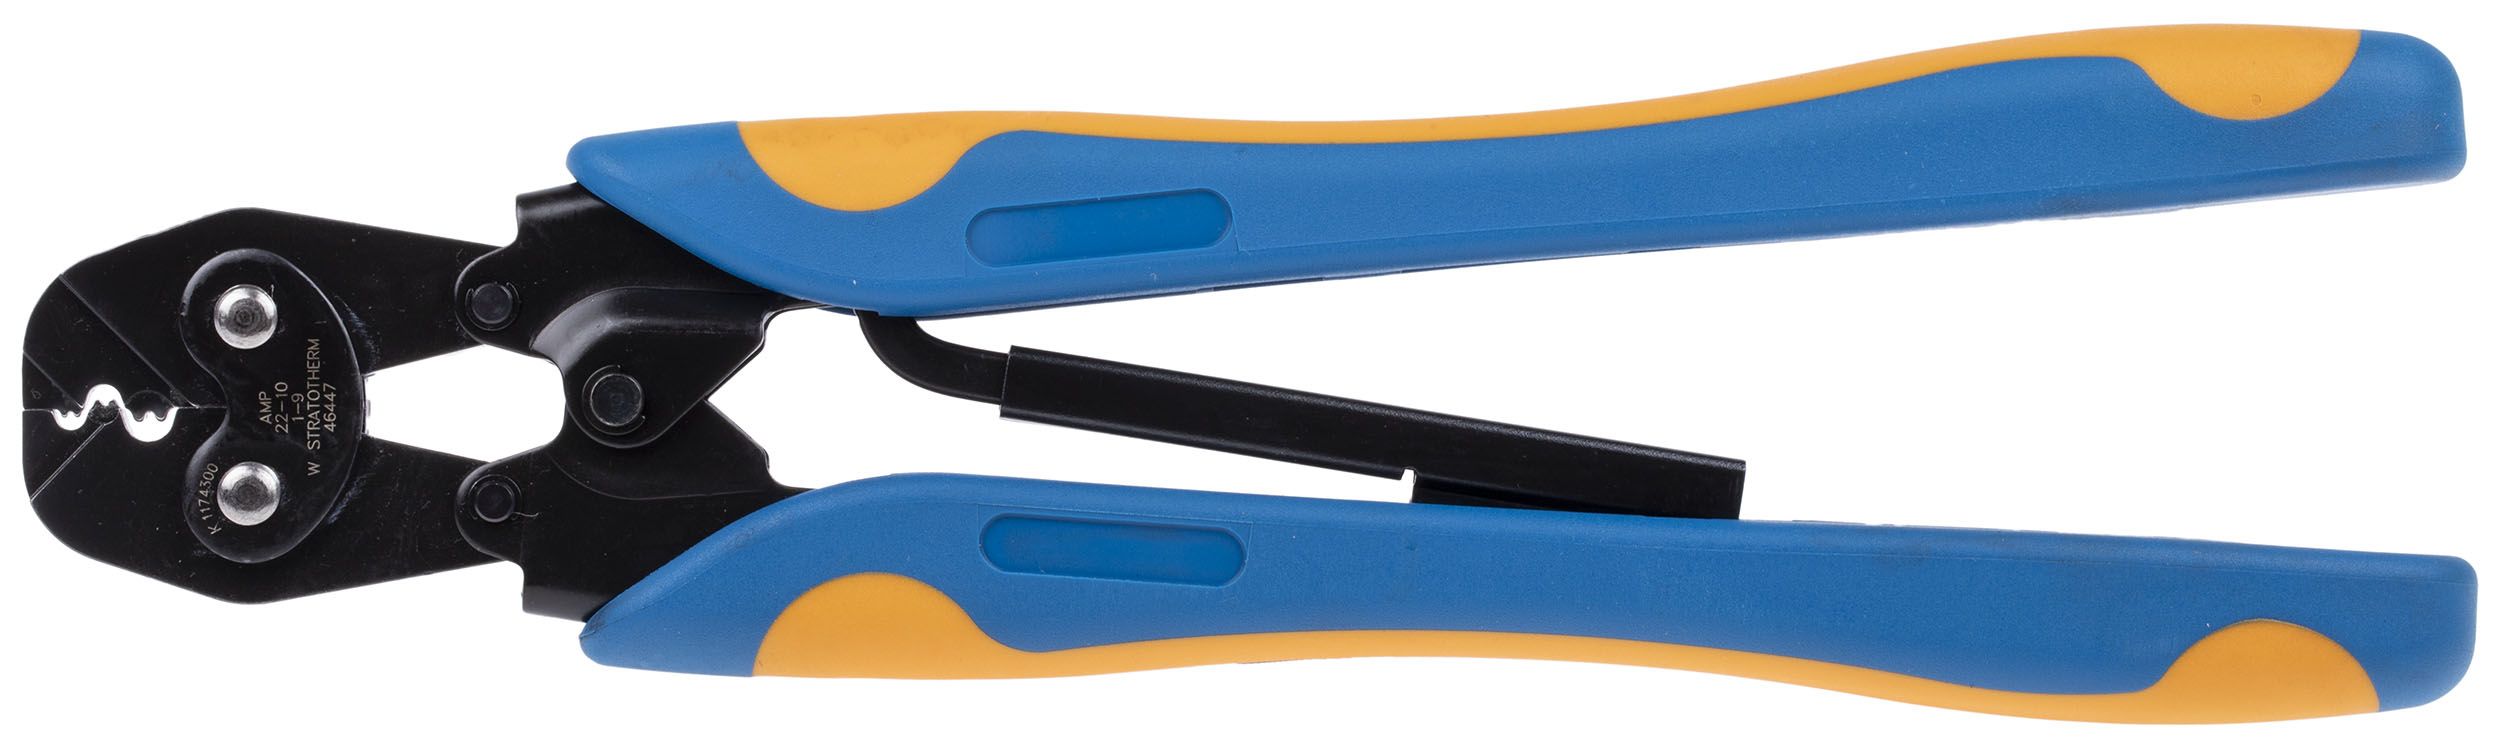 TE Connectivity Ratcheting Hand Crimping Tool for STRATO-THERM/SOLISTRAND Terminals and Splices